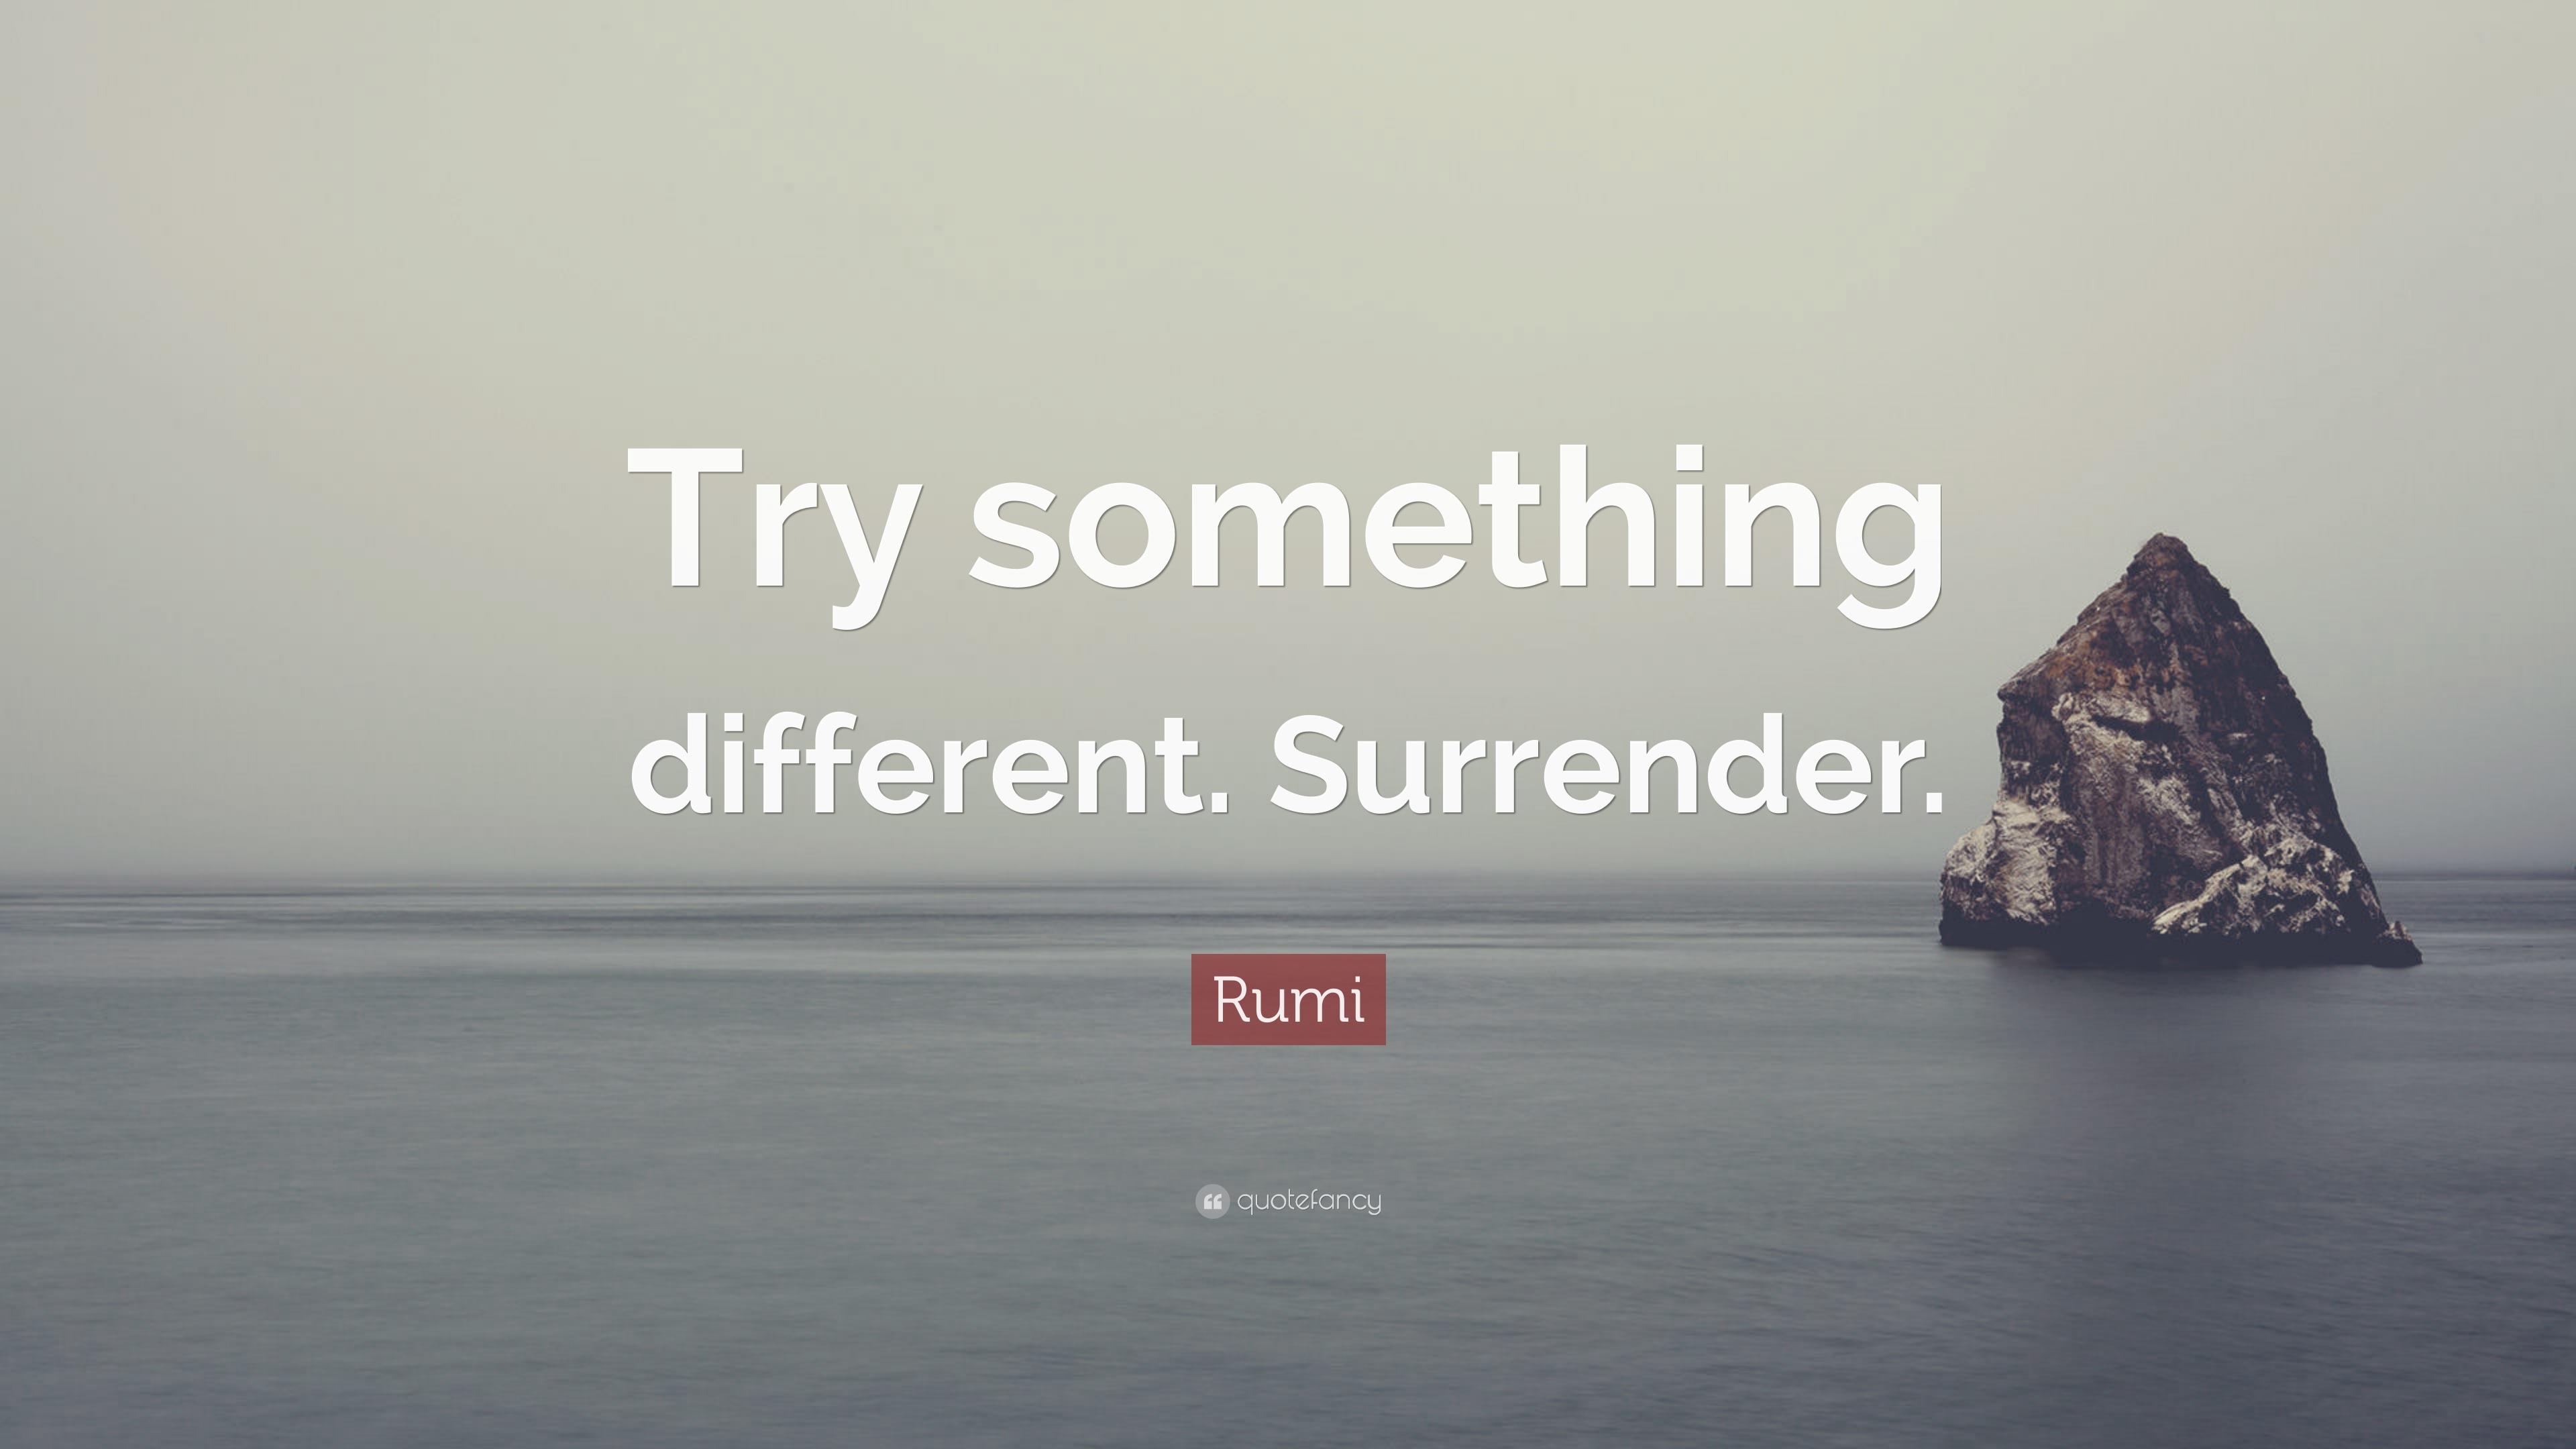 Rumi Quote: “Try something different. Surrender.” (12 wallpaper)